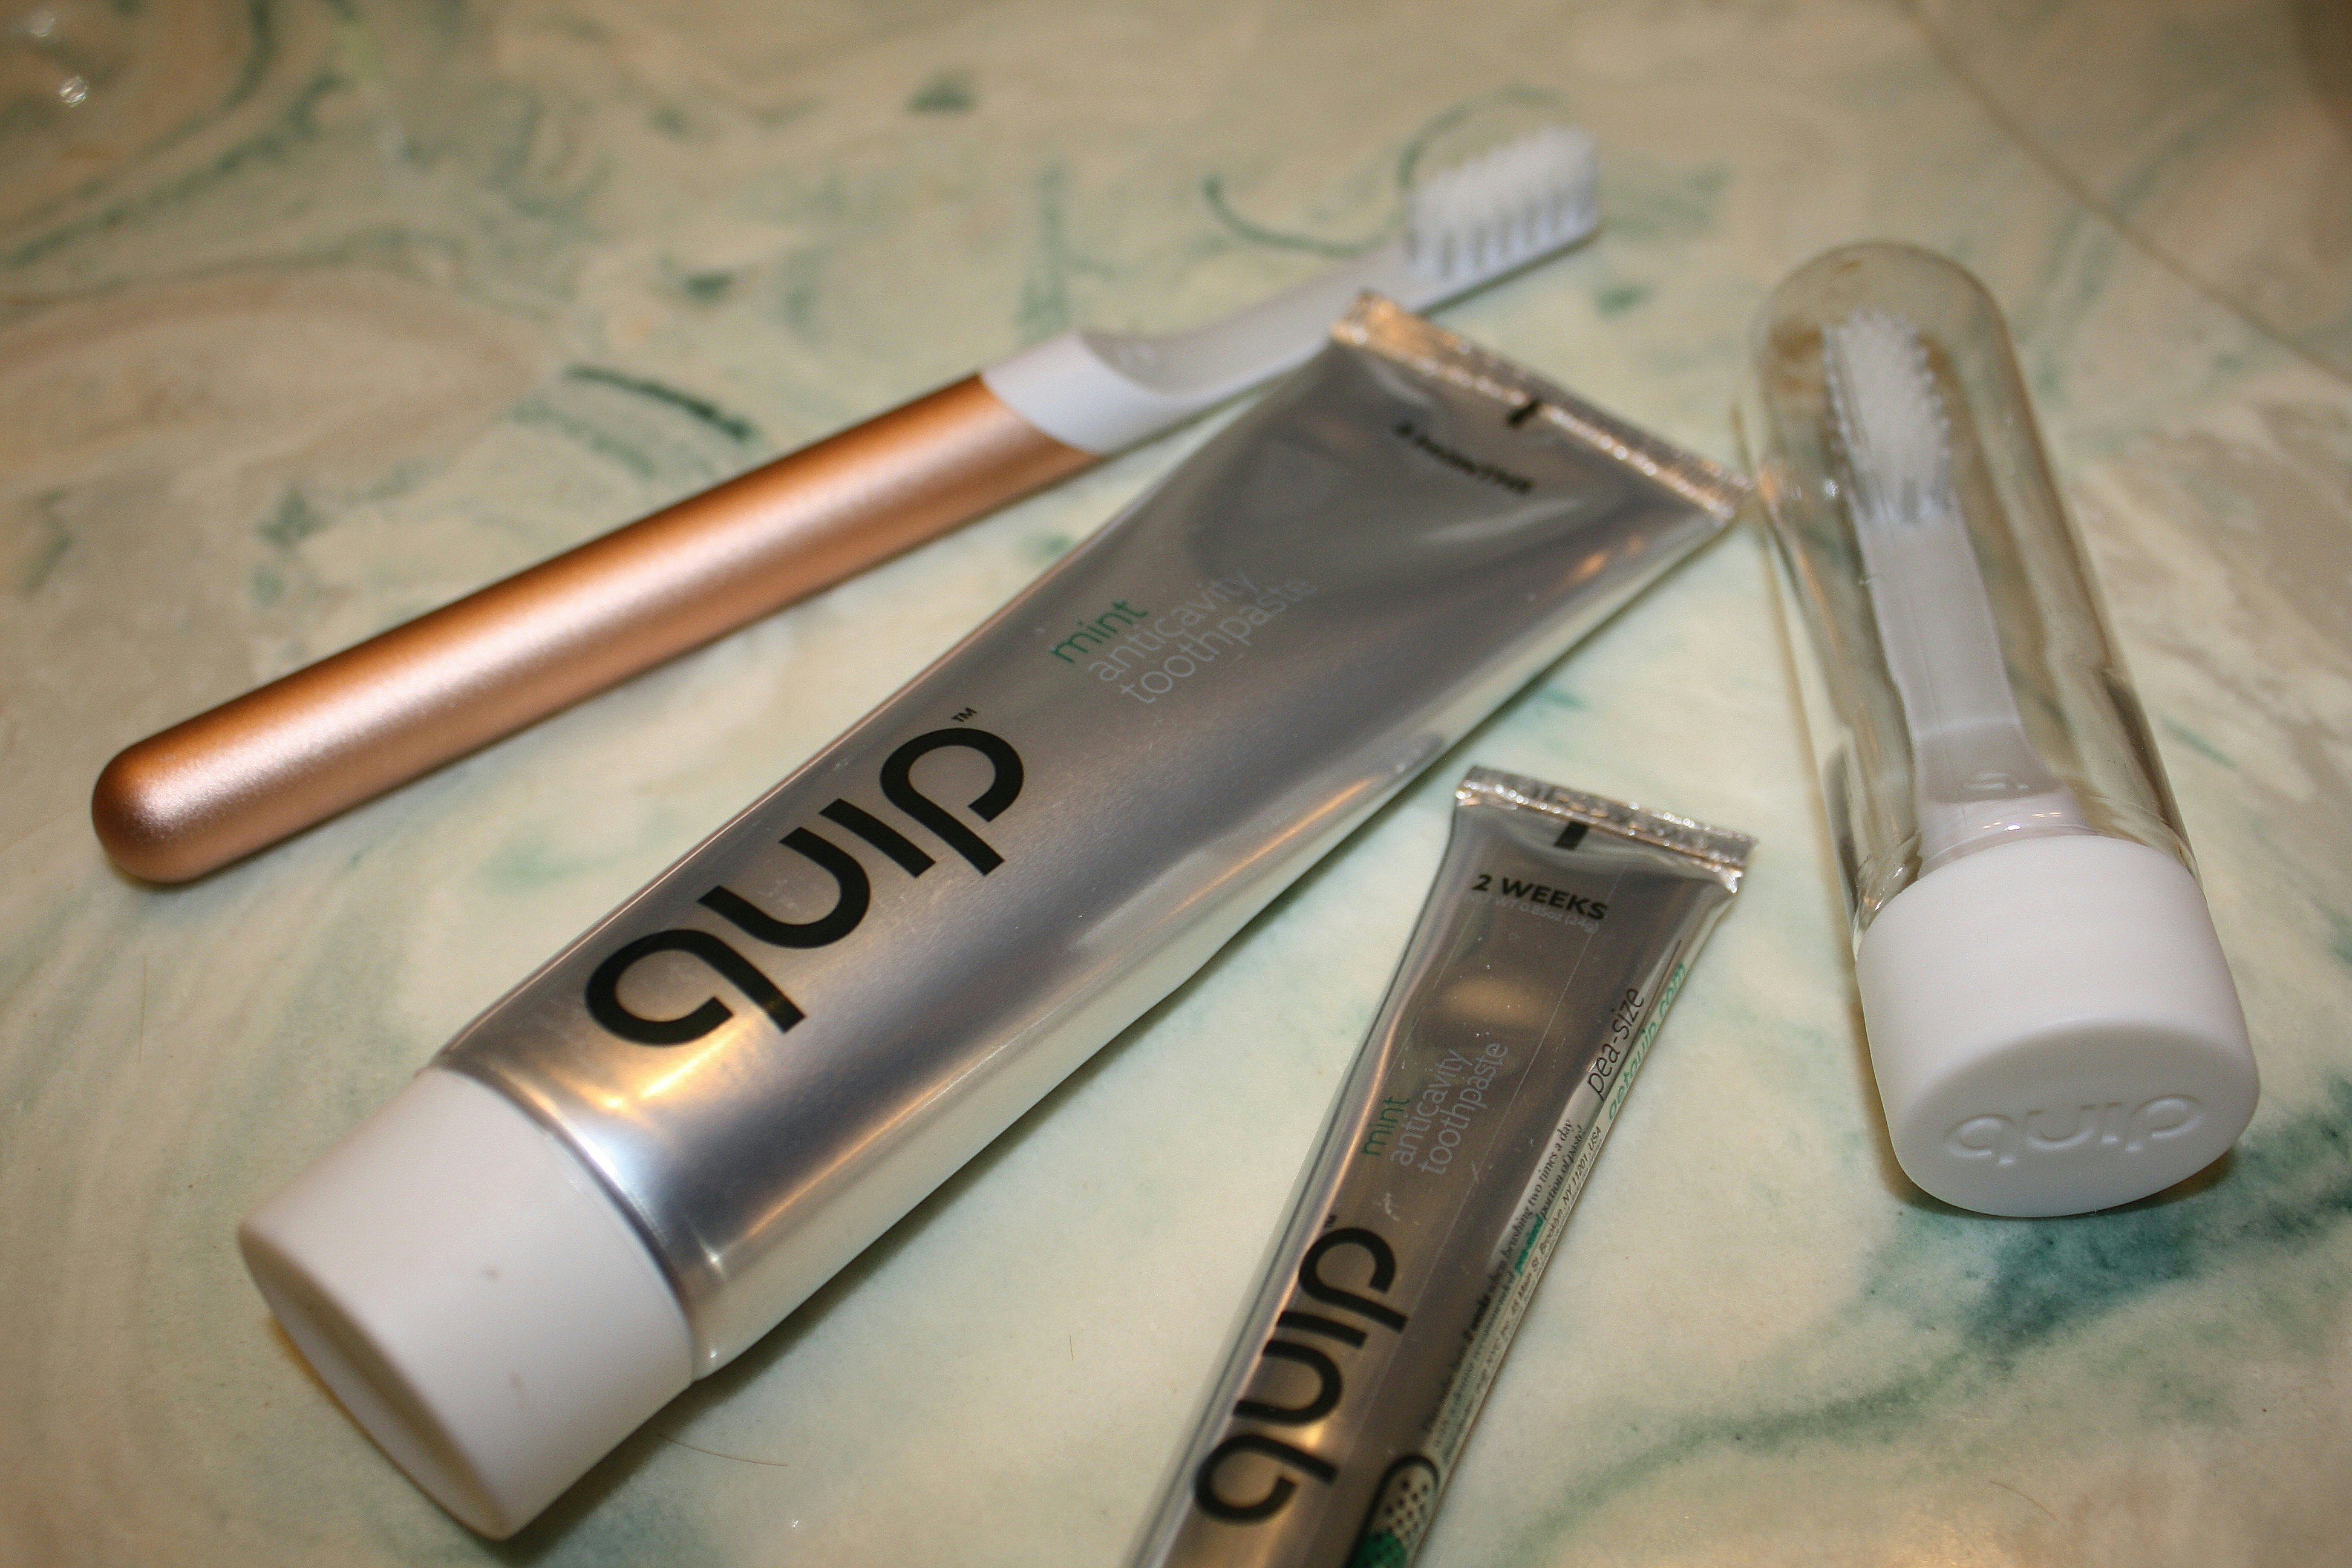 quip toothbrush replacement heads